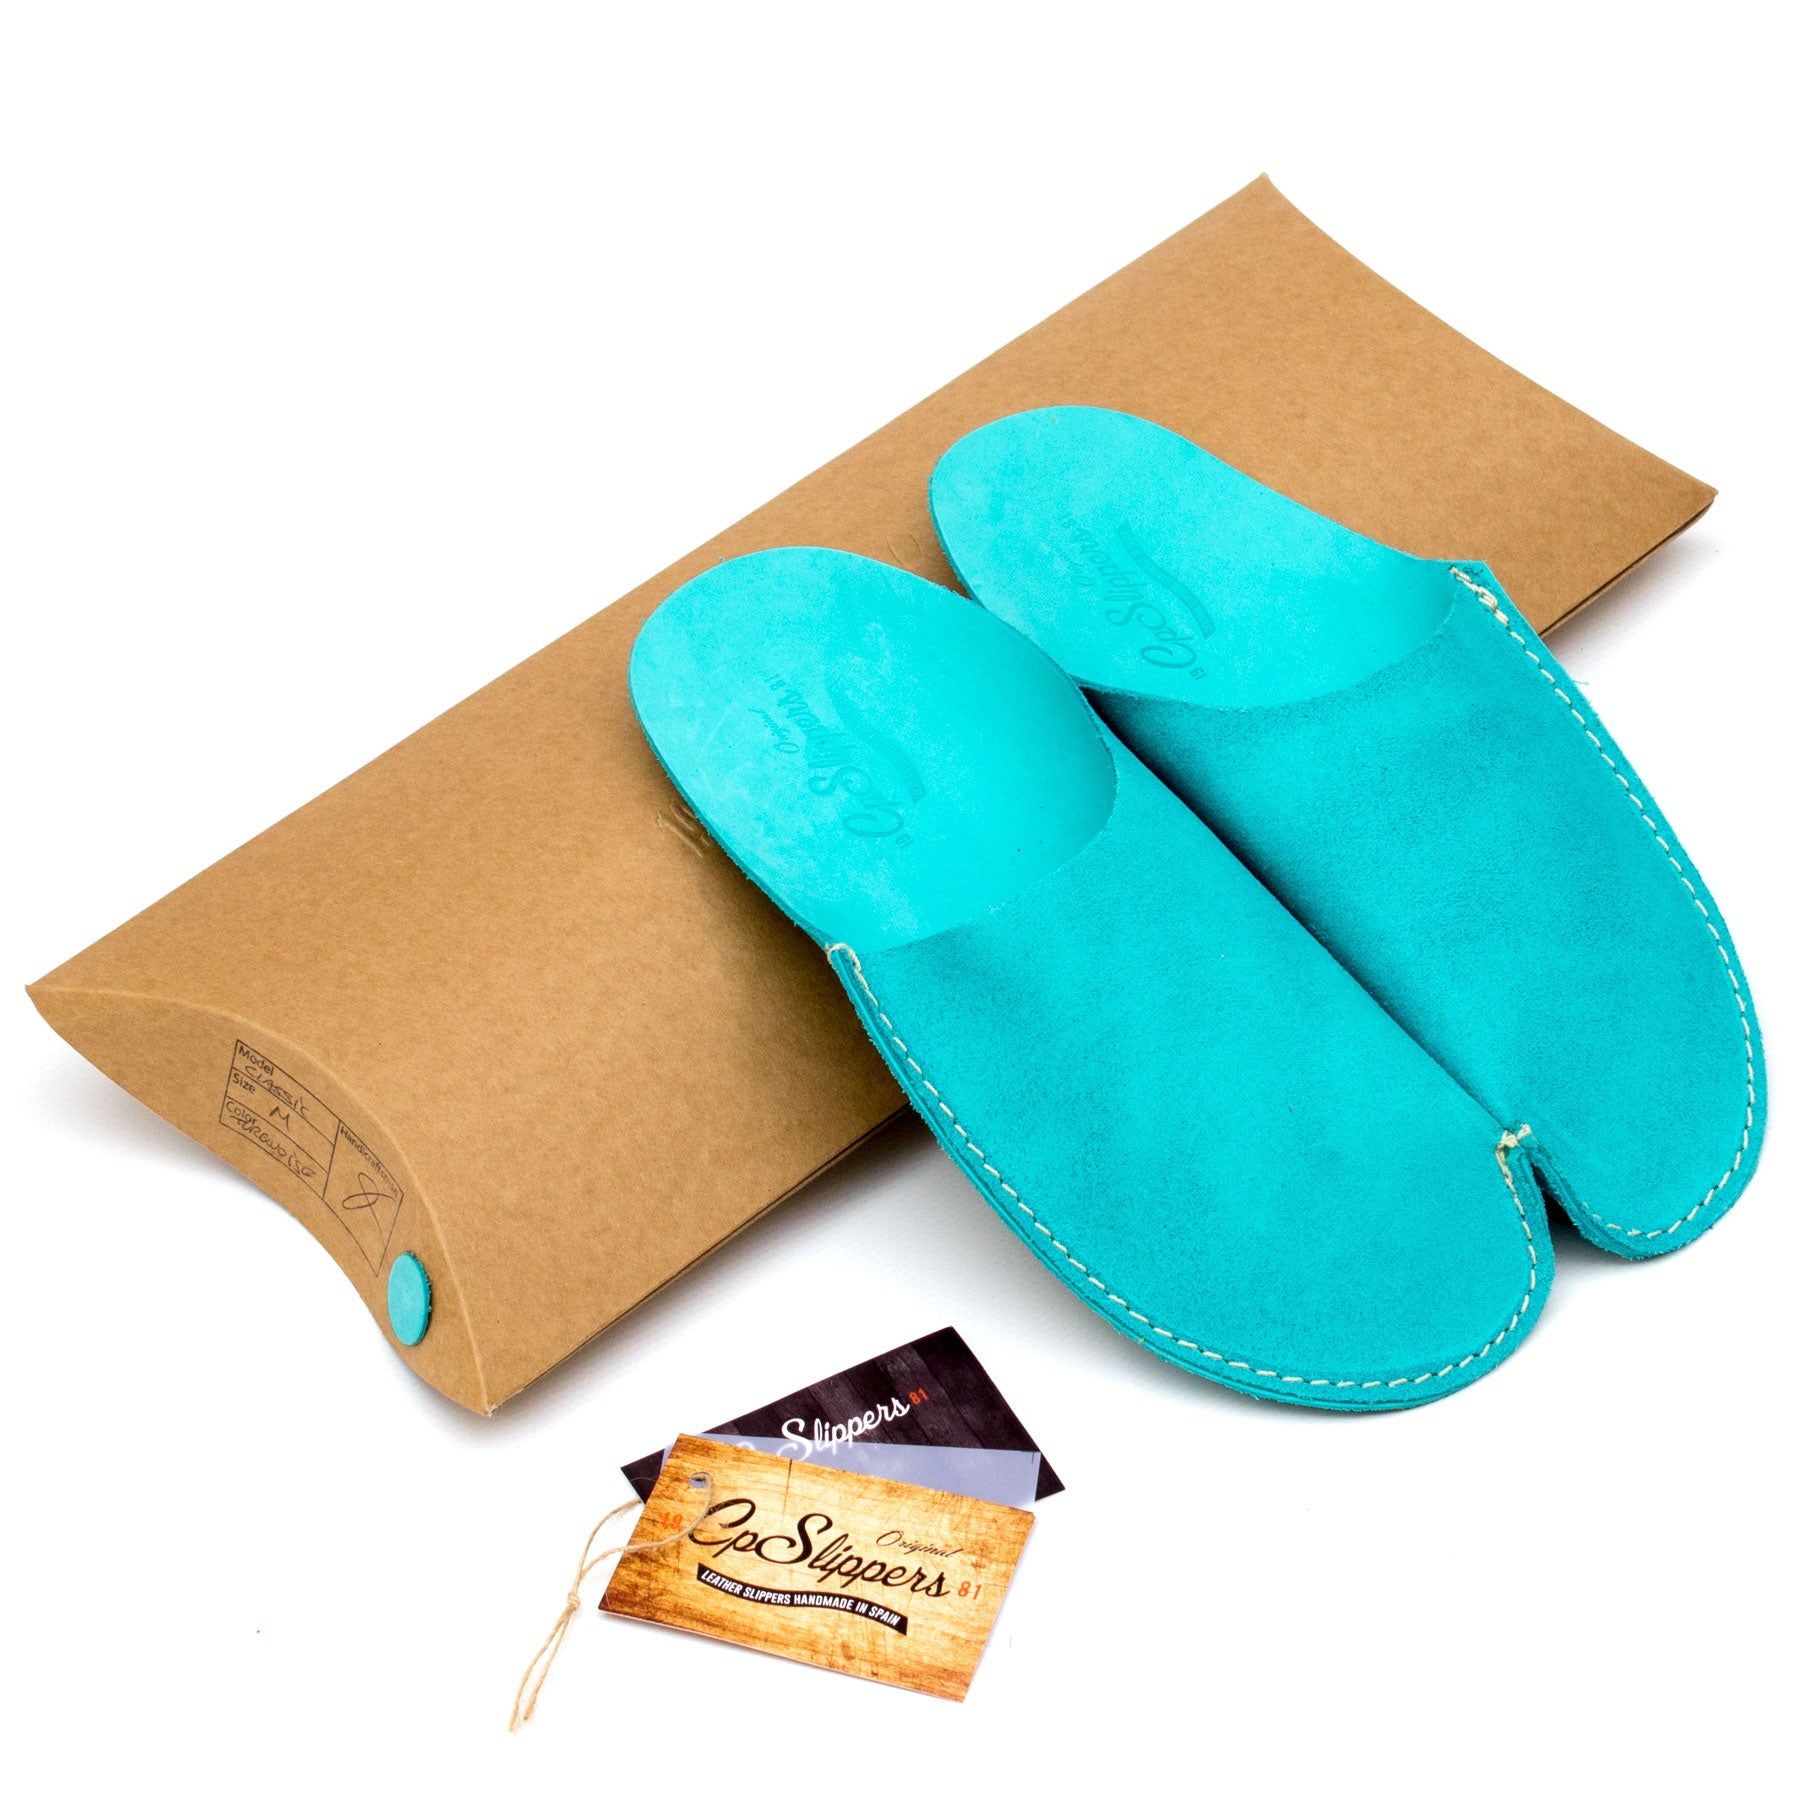 Turquoise CP Slippers Minimalist slipper shoes for man and woman